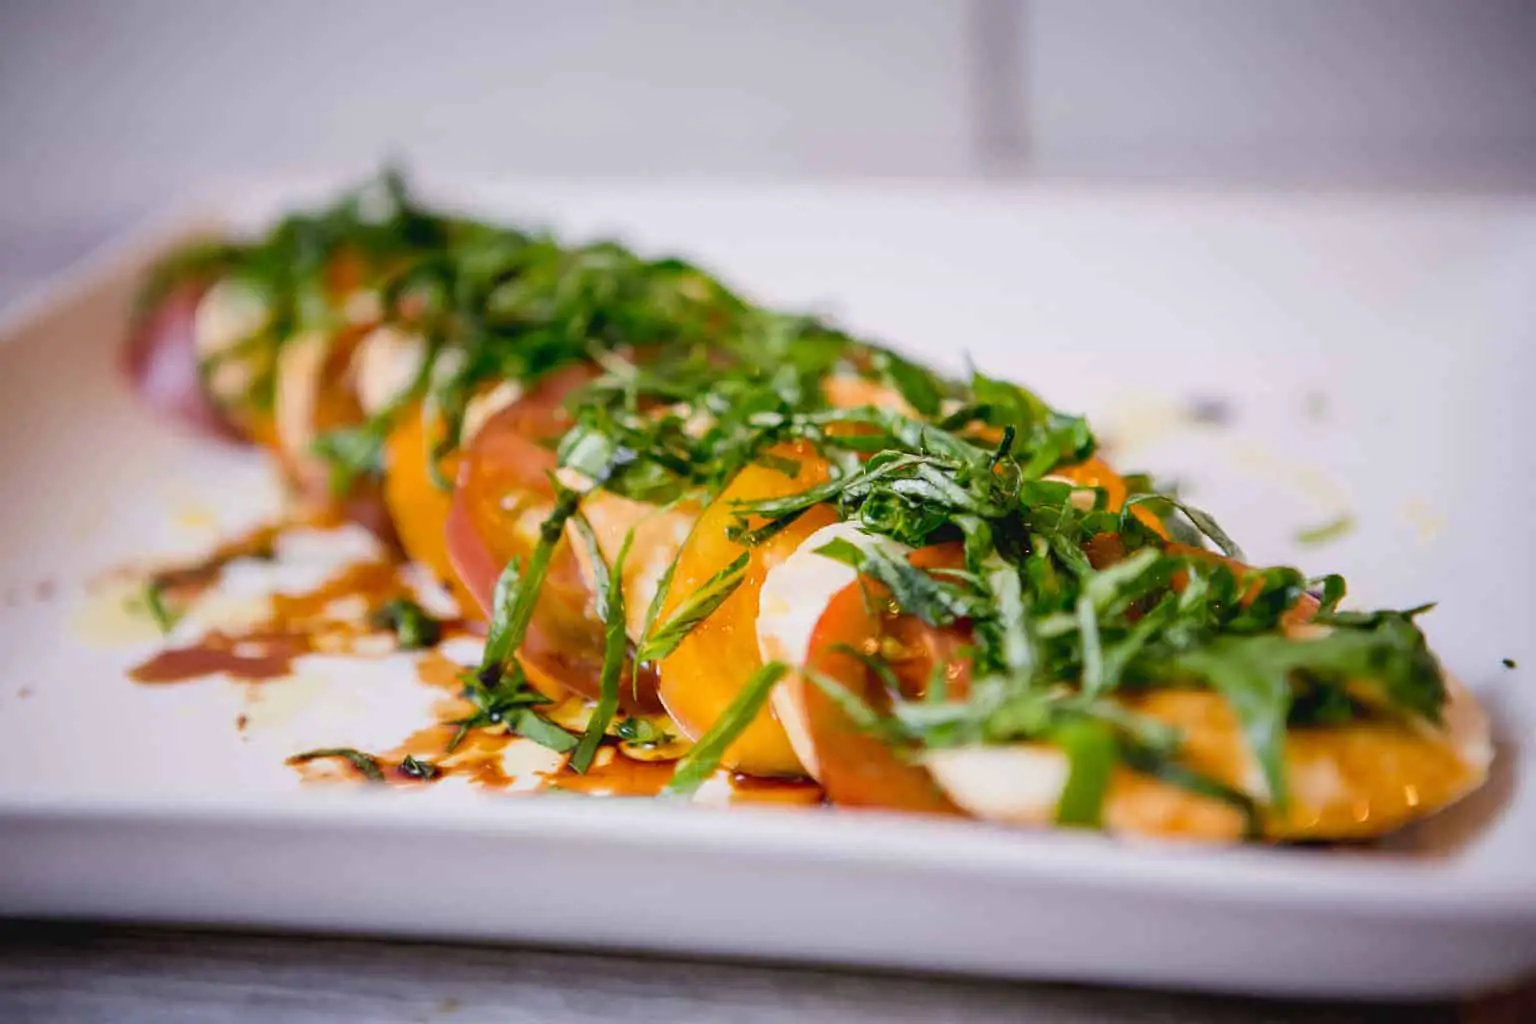 Close-up Caprese salad garnished with herbs and olive oil served on a white plate placed on a wooden table